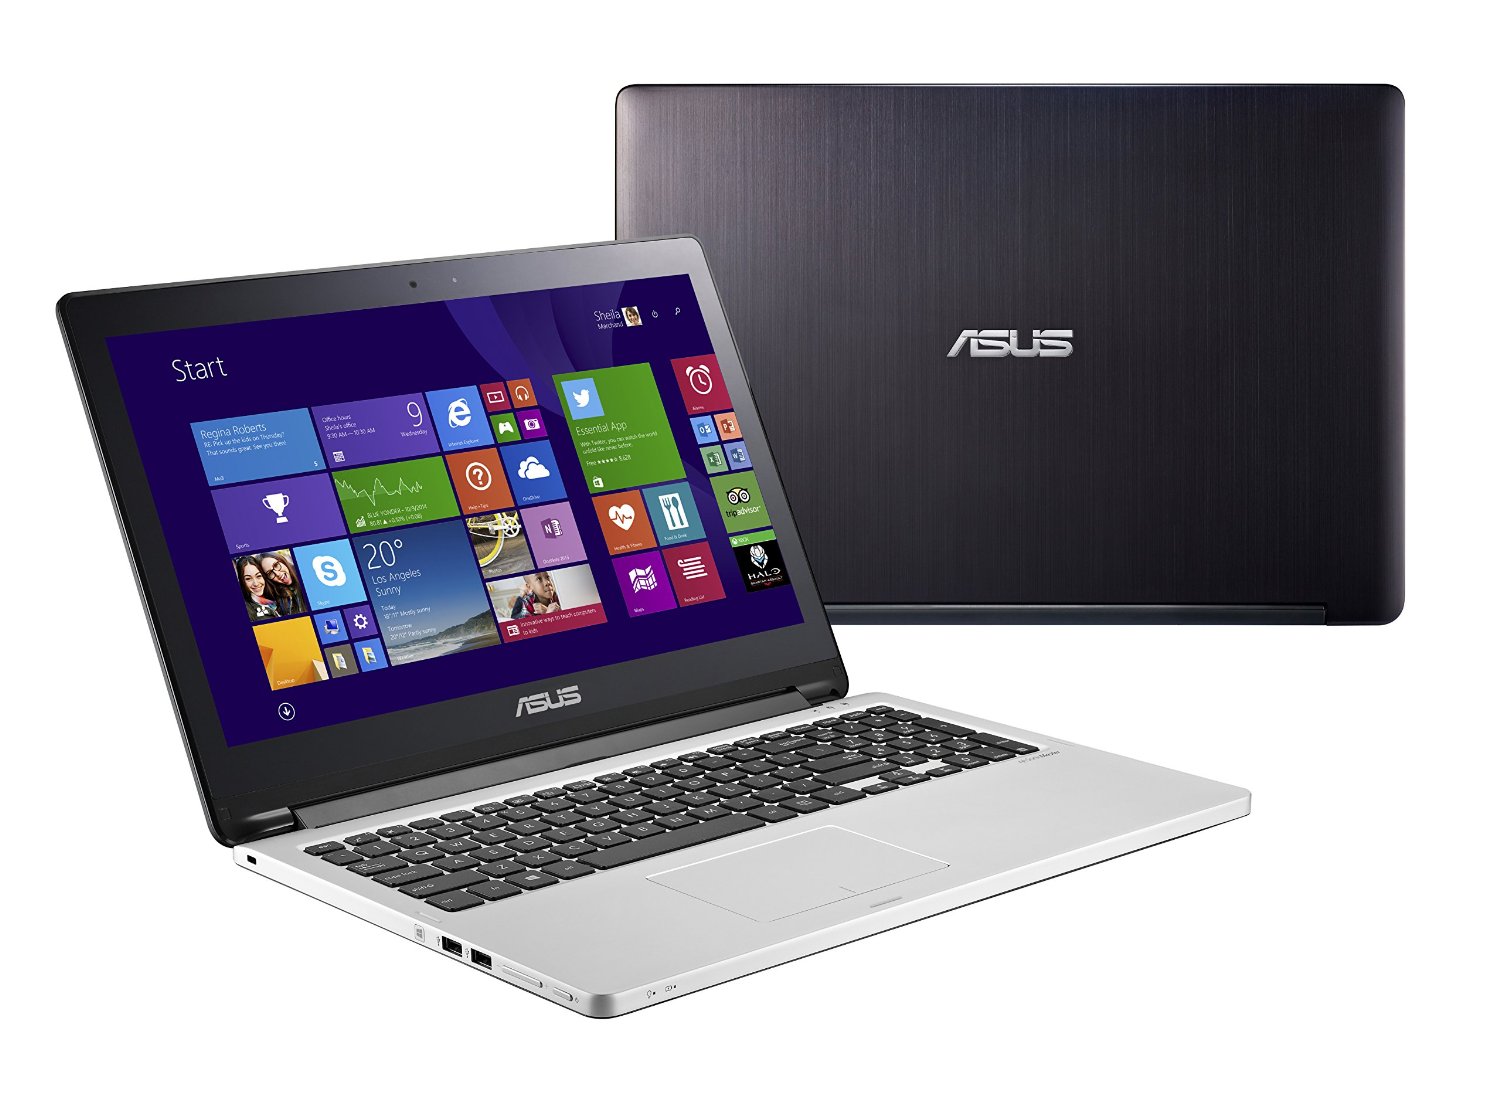 back to school sales, back to school 2015, cheap laptops, laptops, laptop, laptop deals, laptop sales